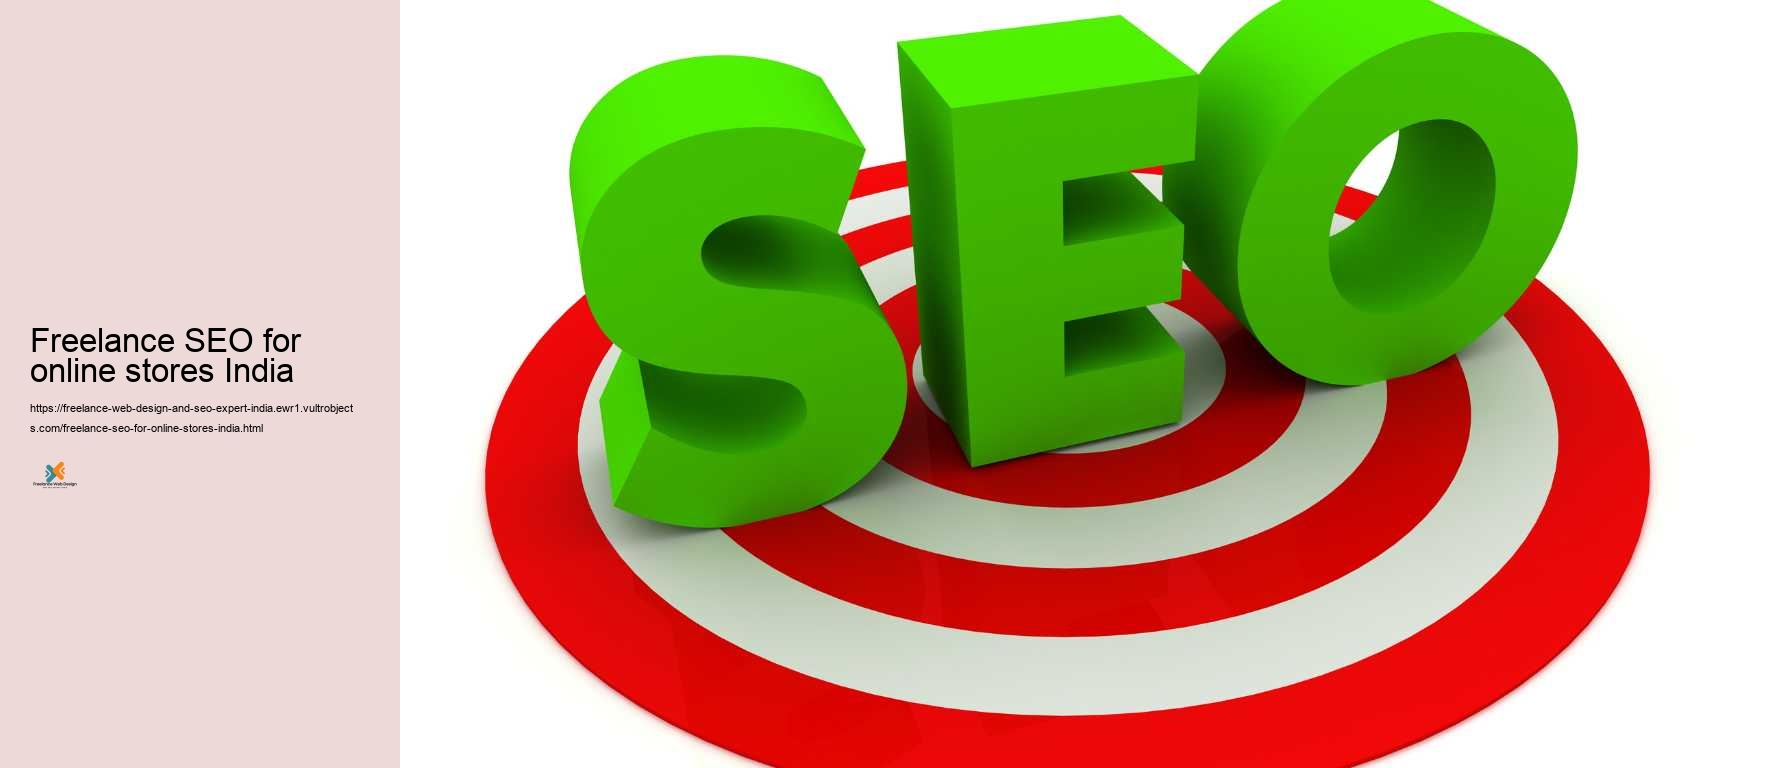 Freelance SEO for online stores India